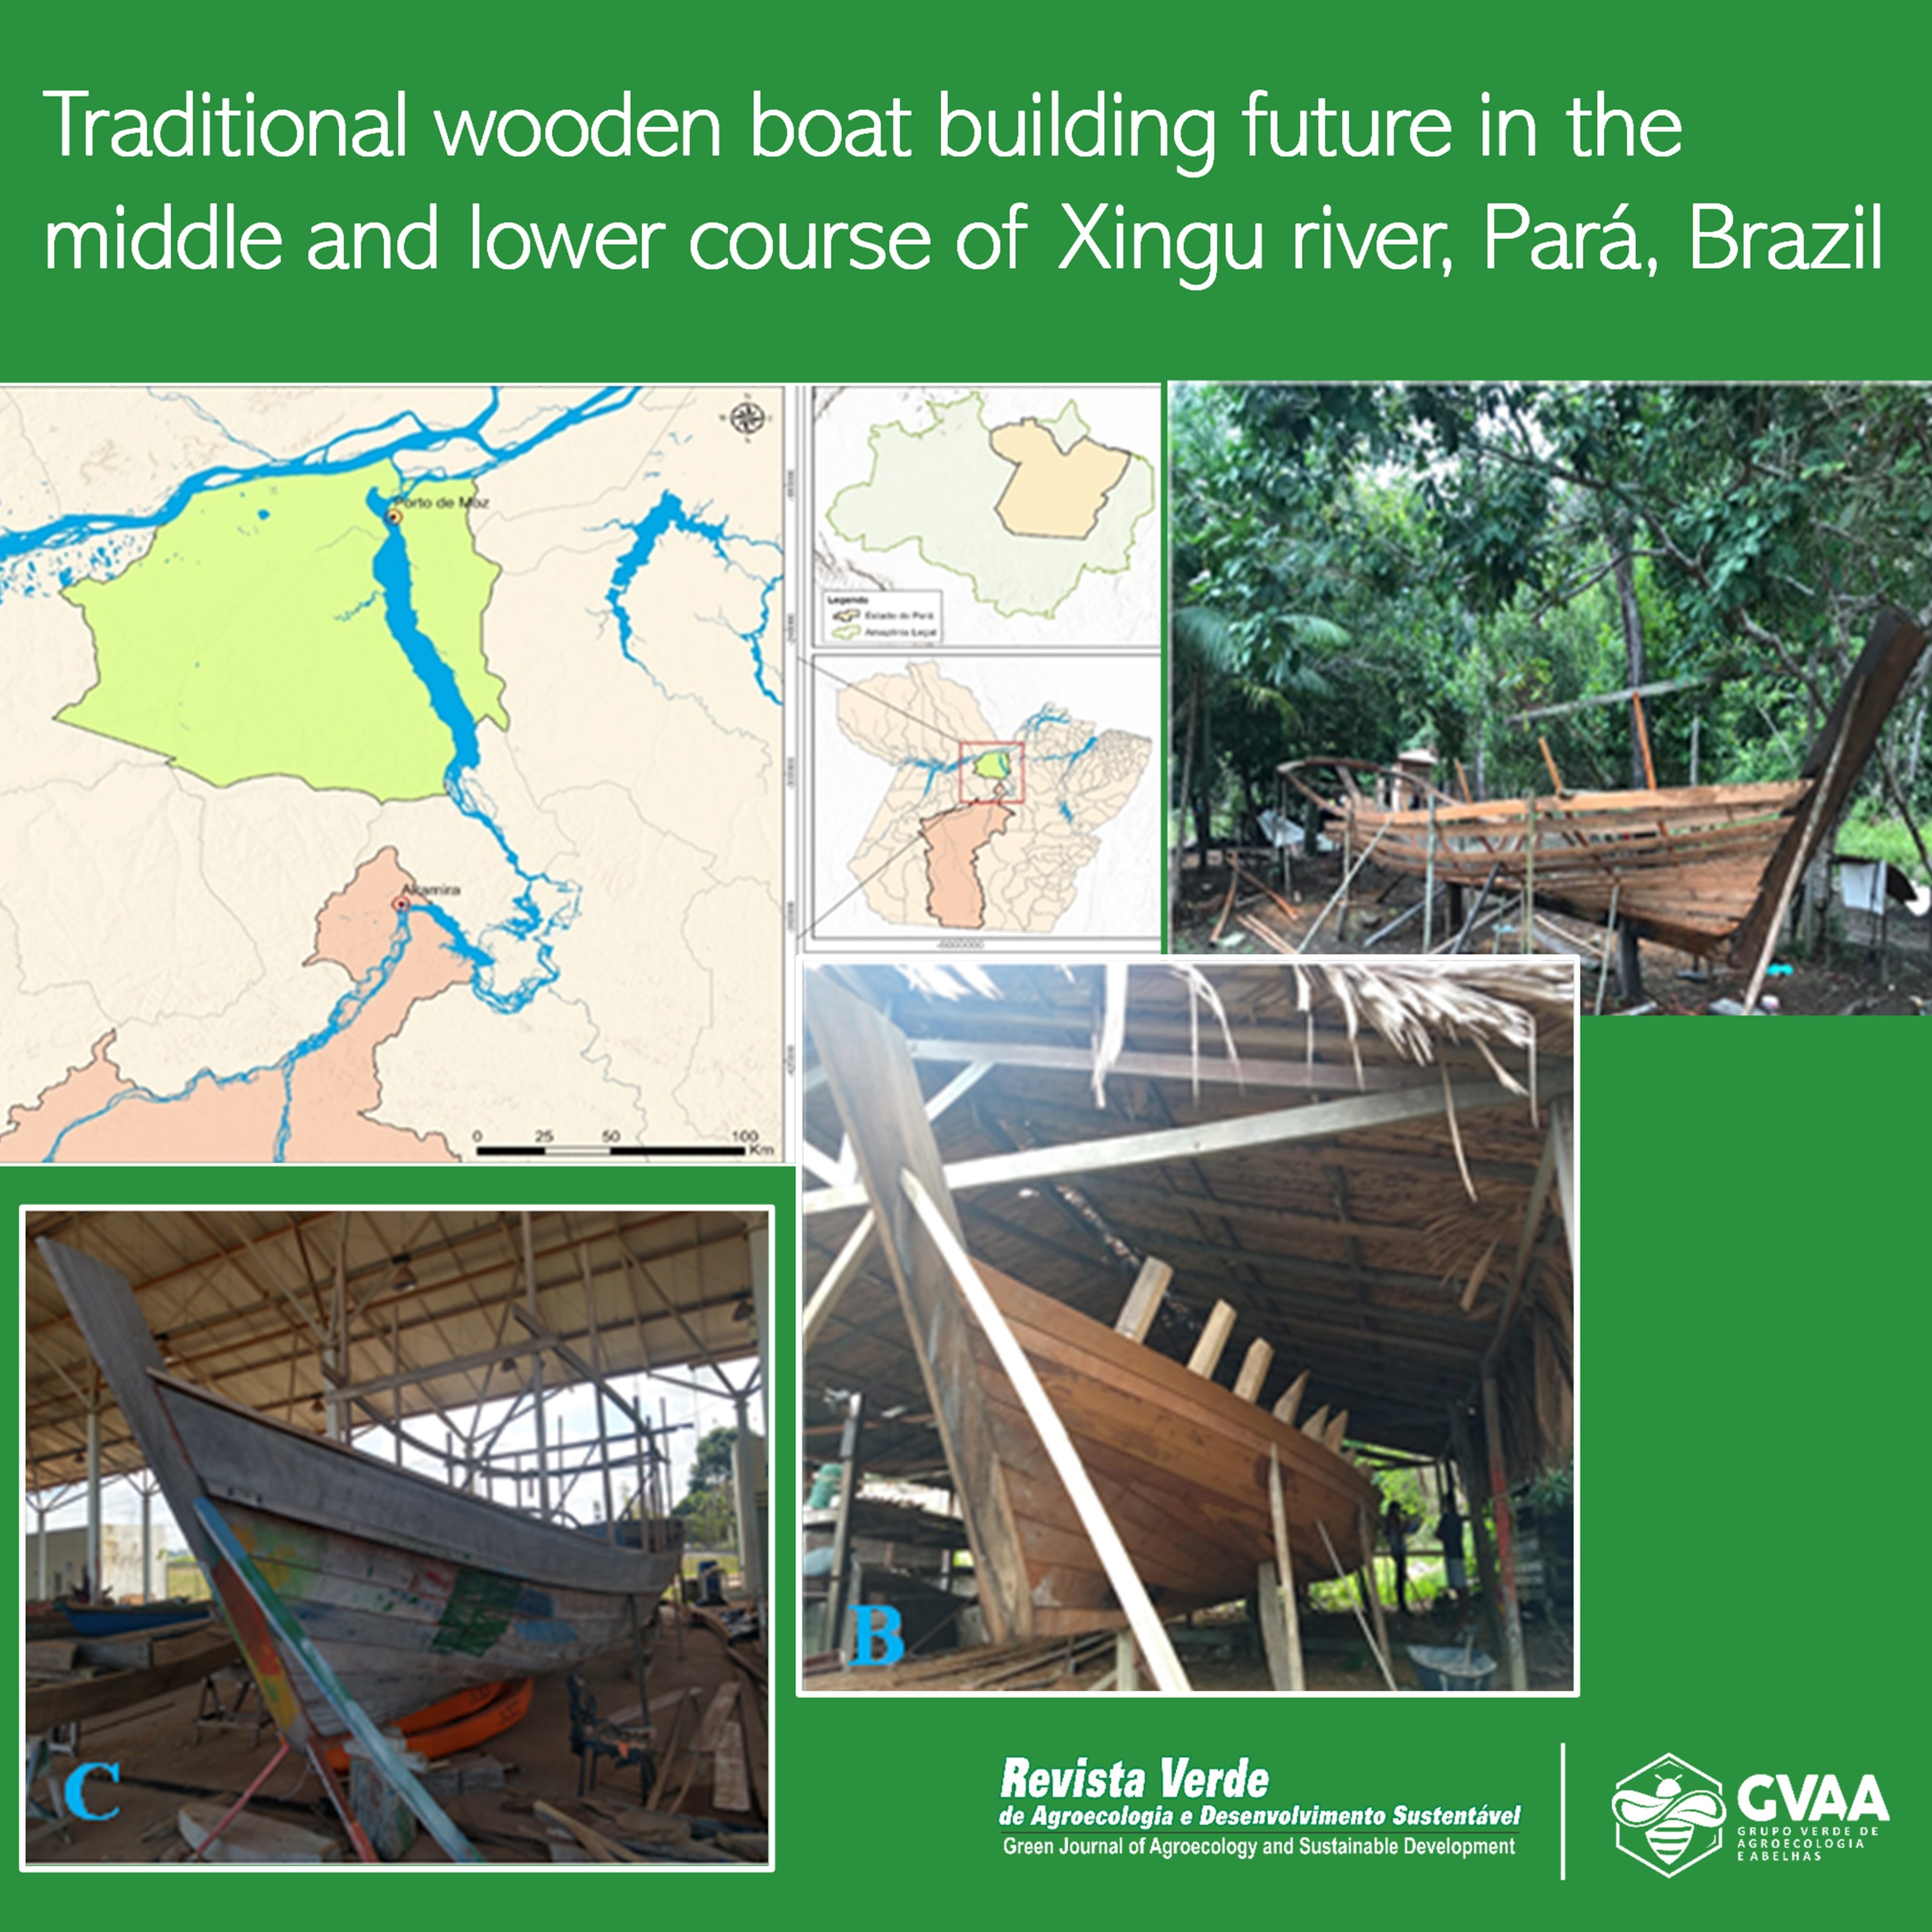 Traditional wooden boat building future in the middle and lower course of Xingu river, Pará, Brazil